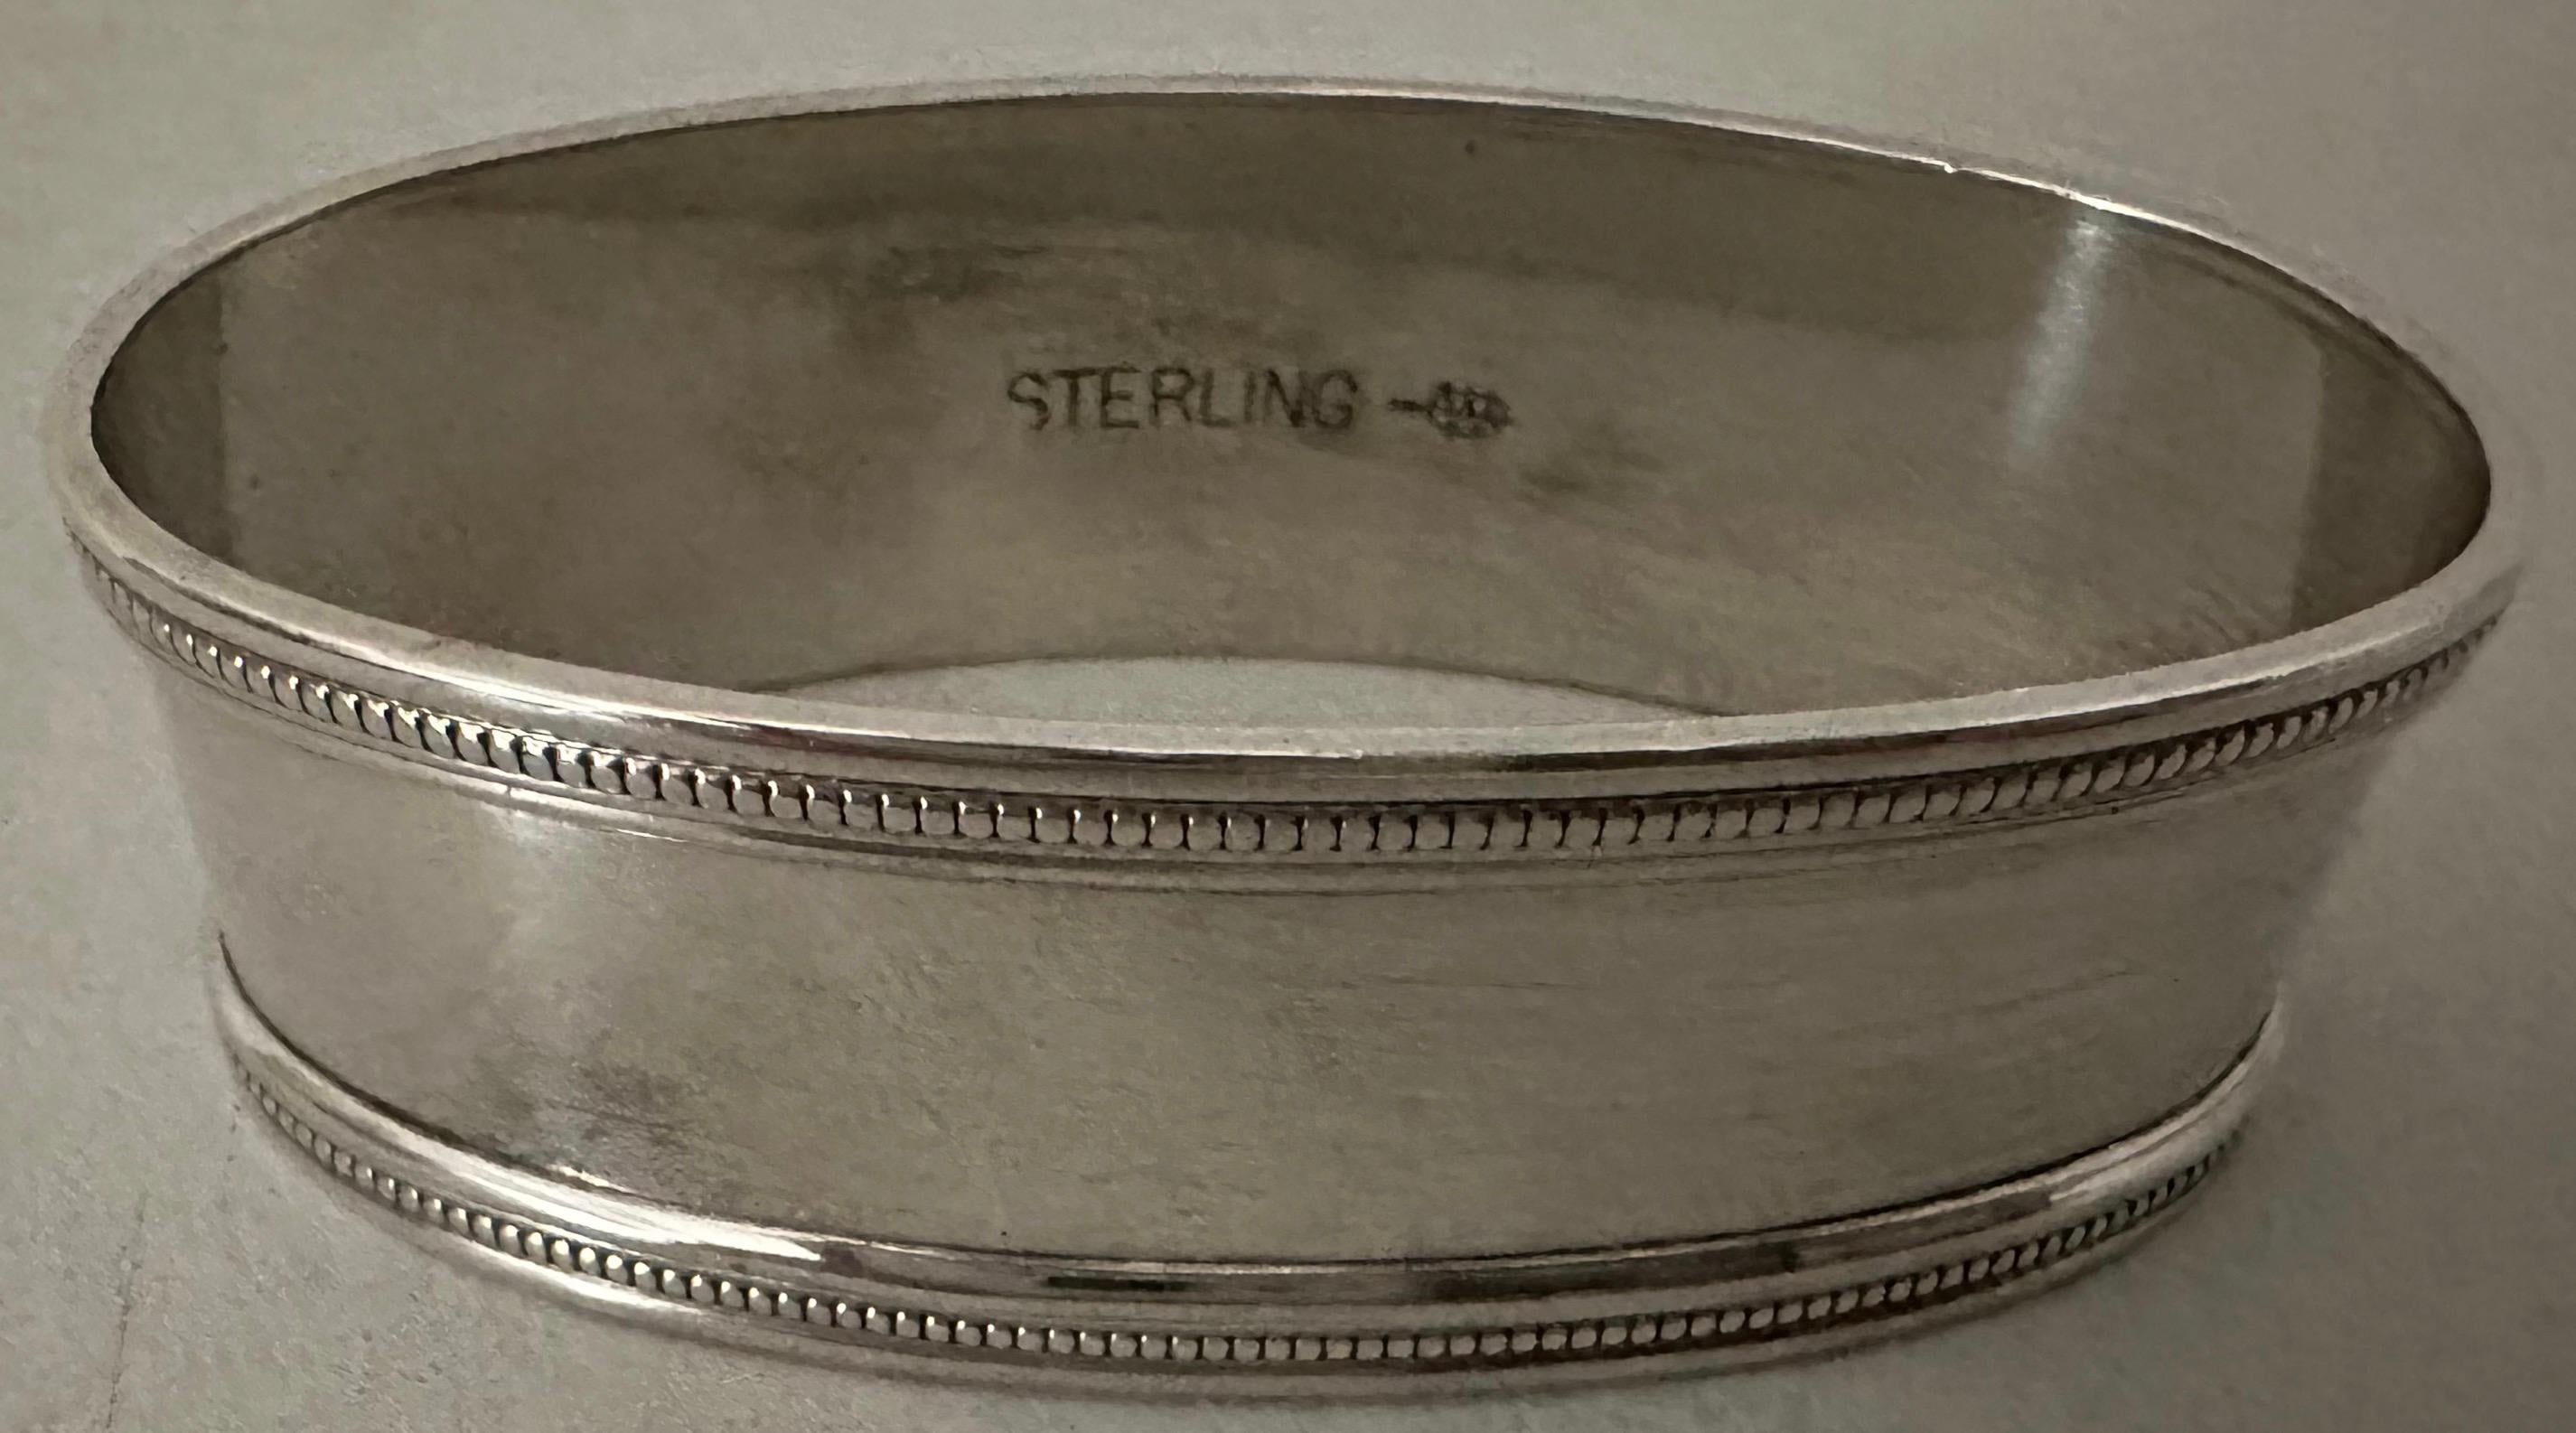 Treat yourself or a friend  to this simple elegant and classic oval sterling napkin ring stamped 